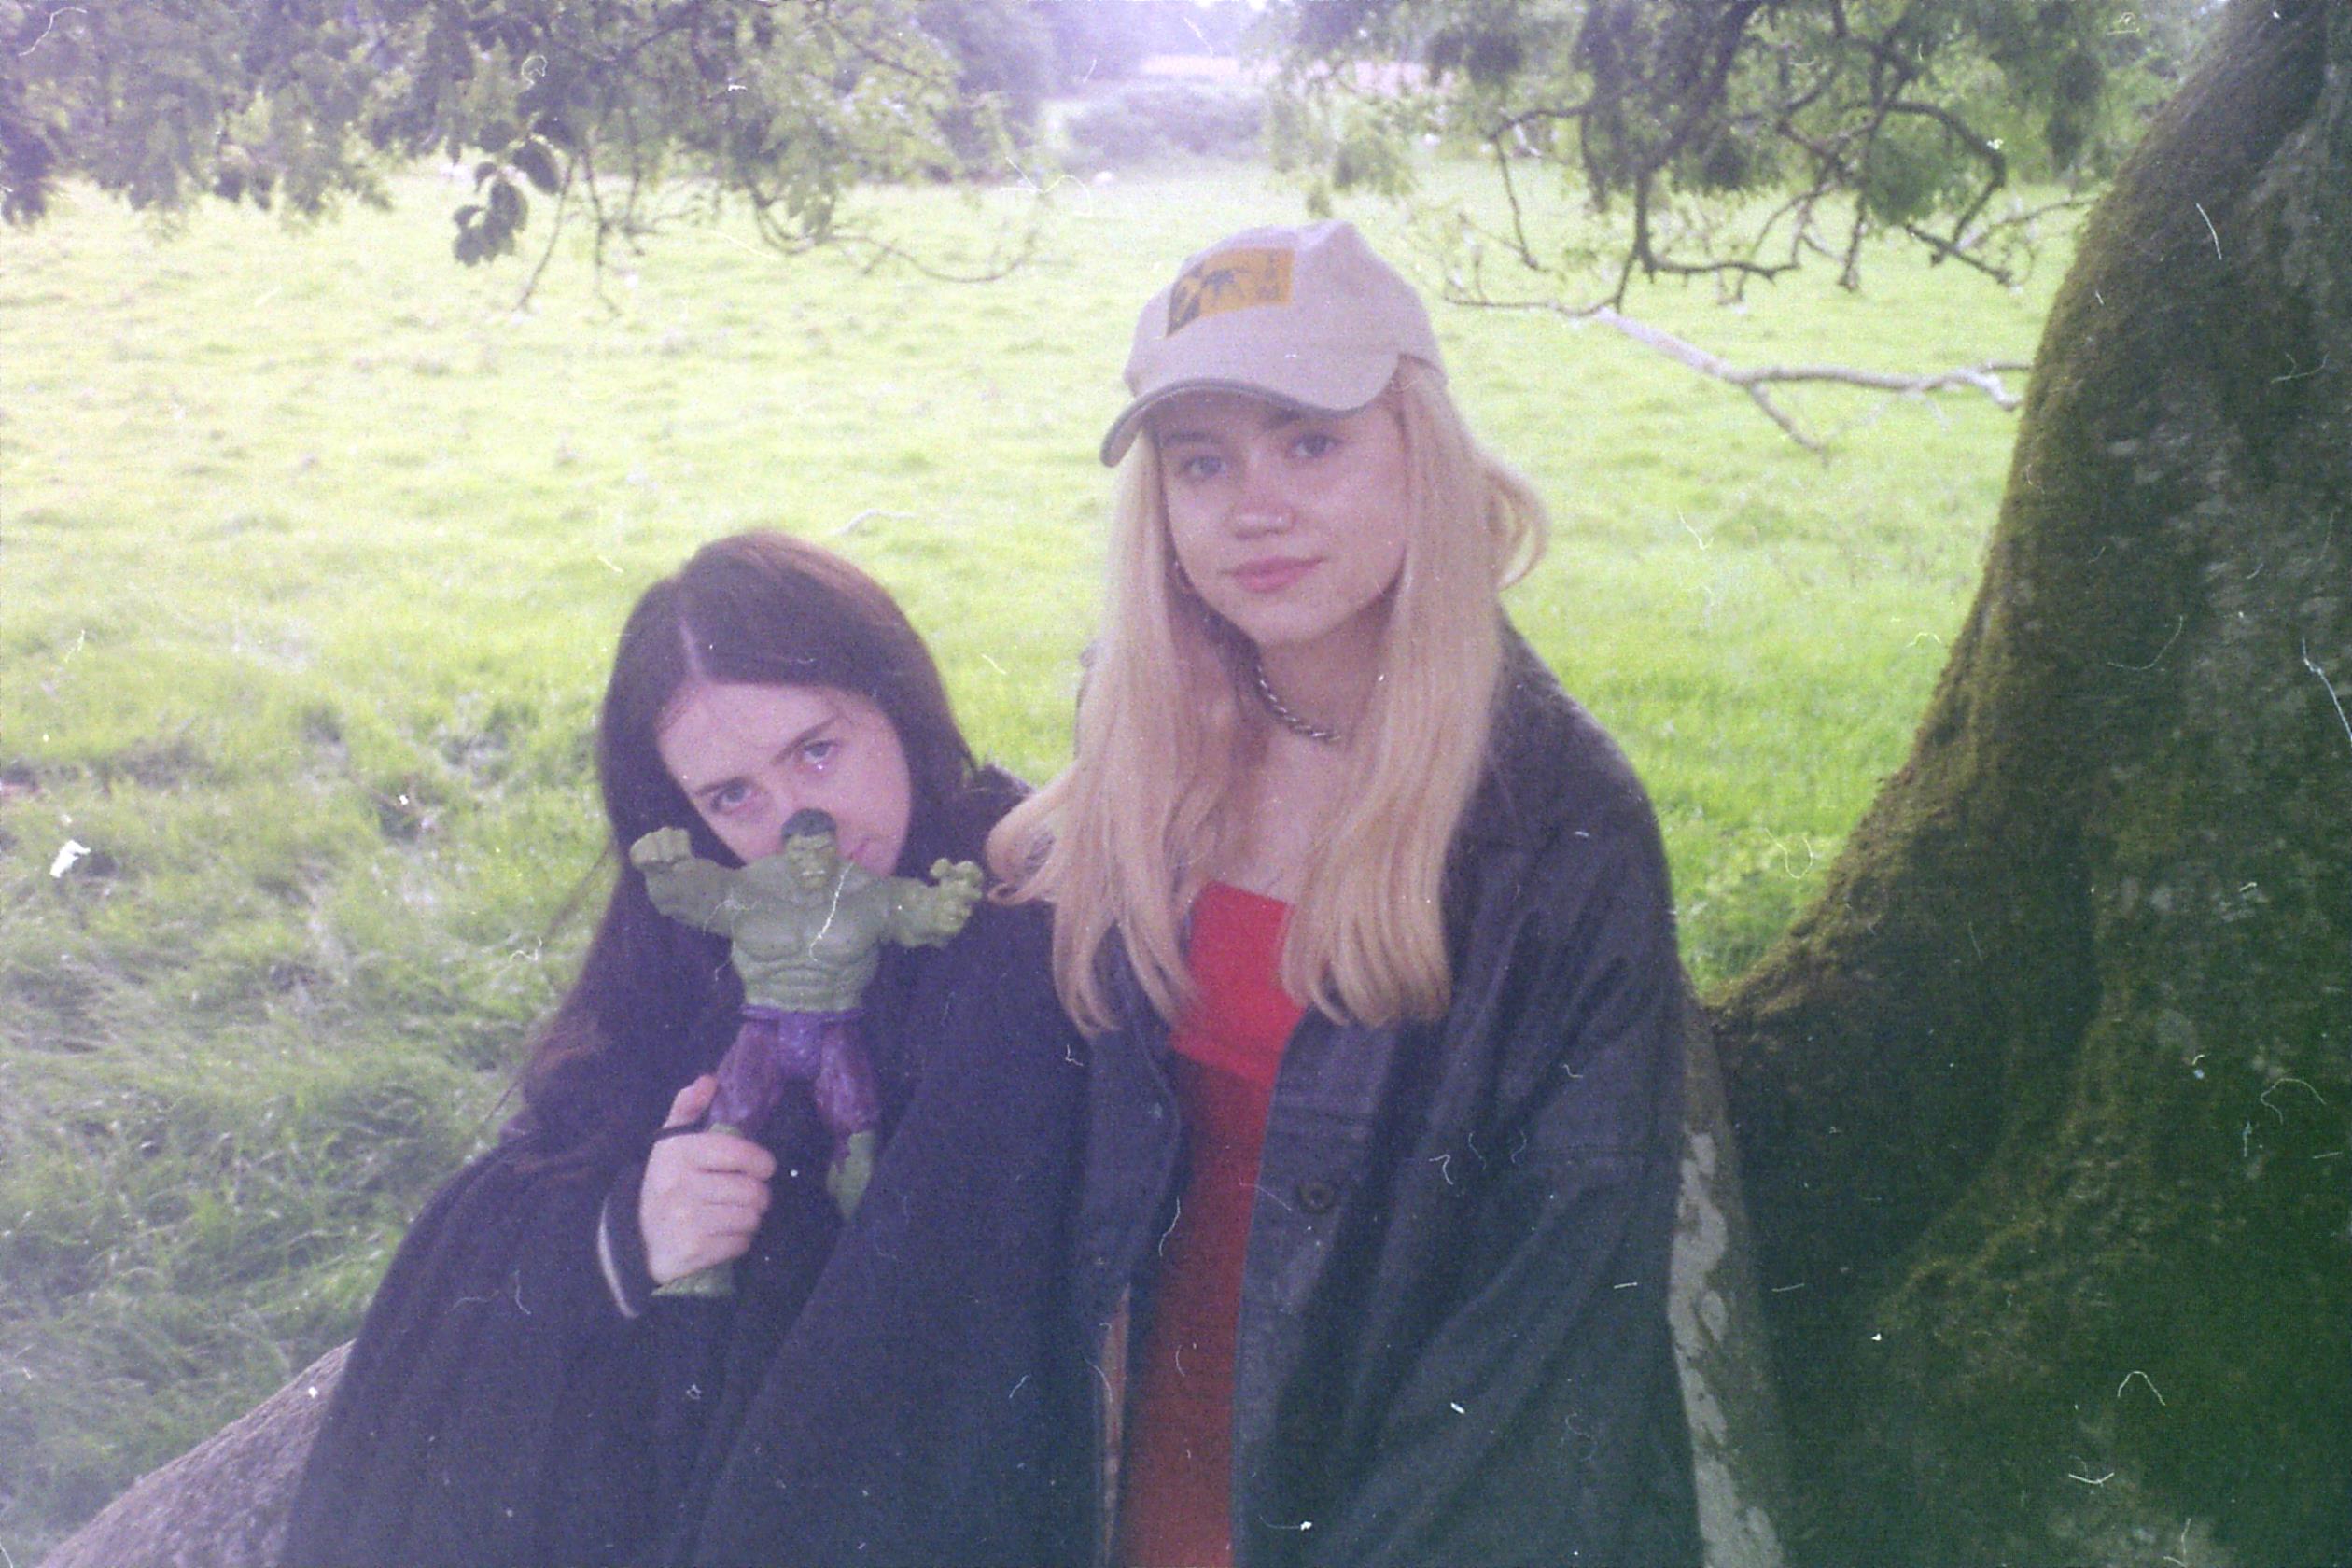 izzy and alannah in a field with a toy